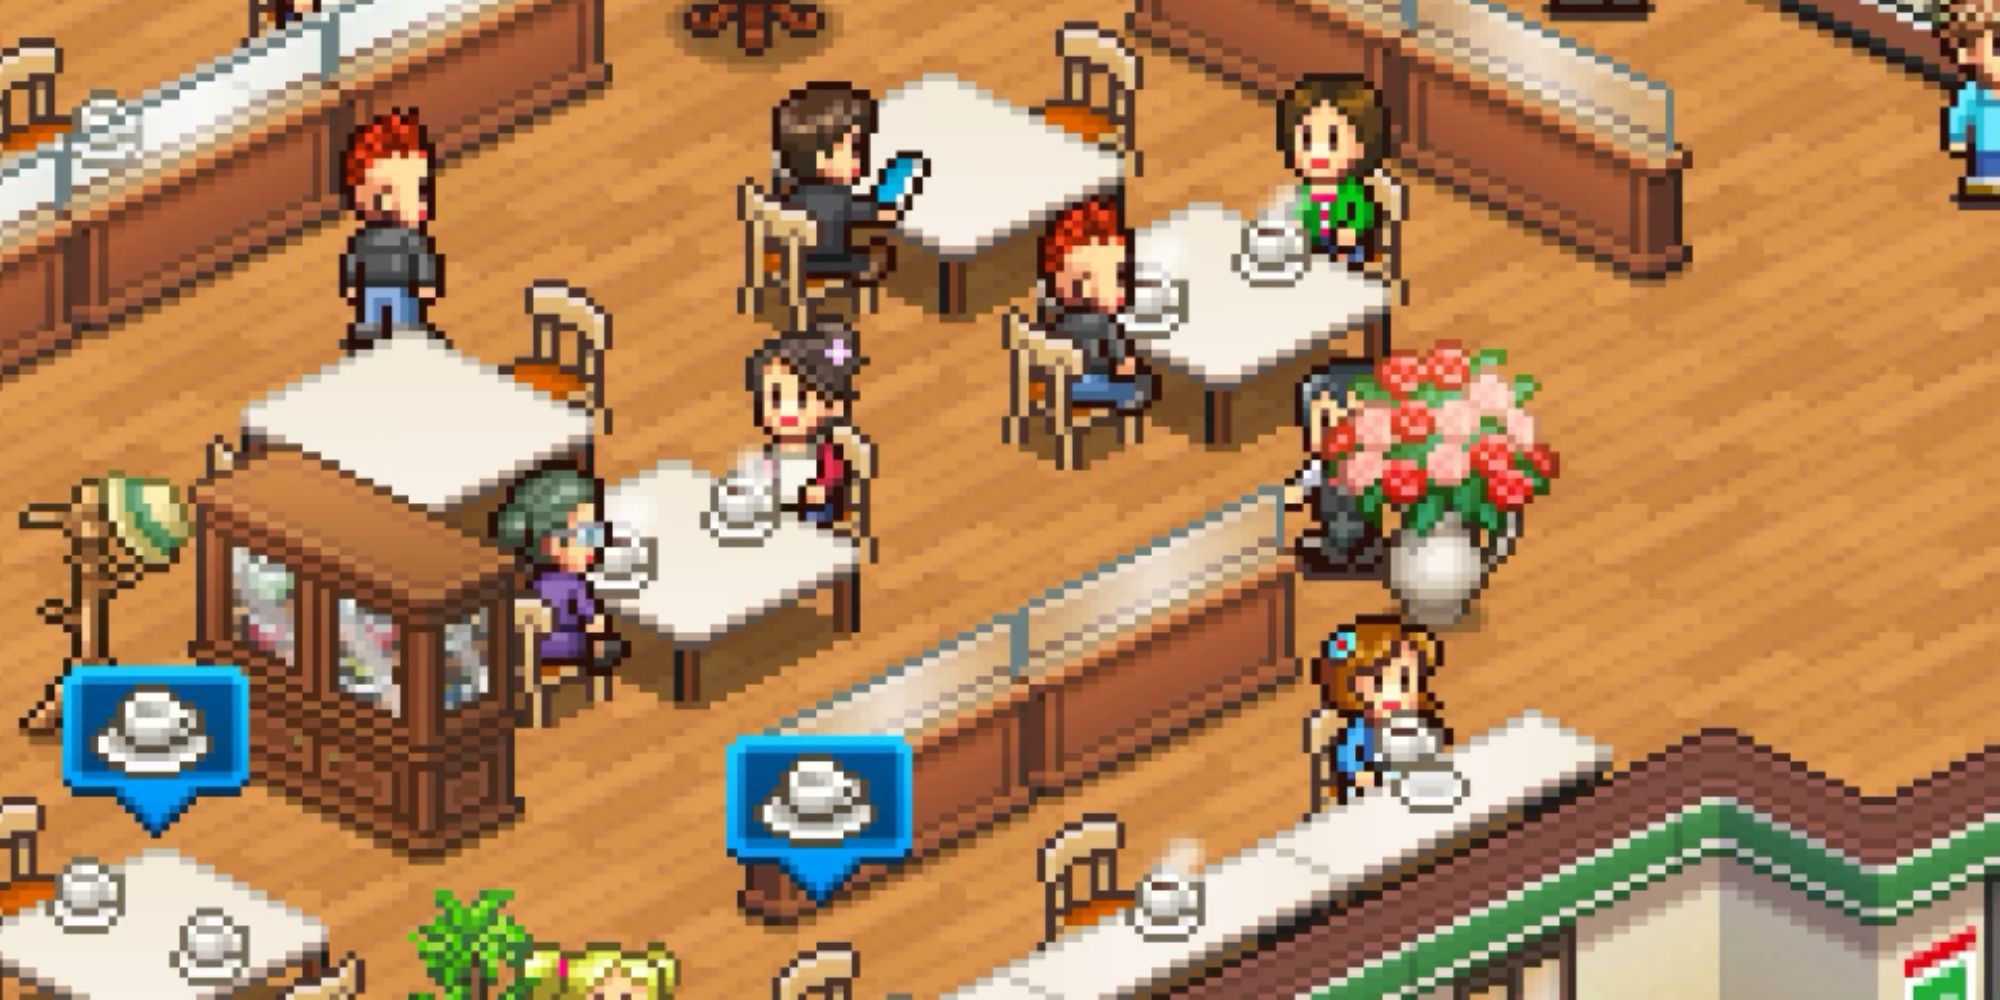 Customers sitting down with coffee in Cafe Master Story